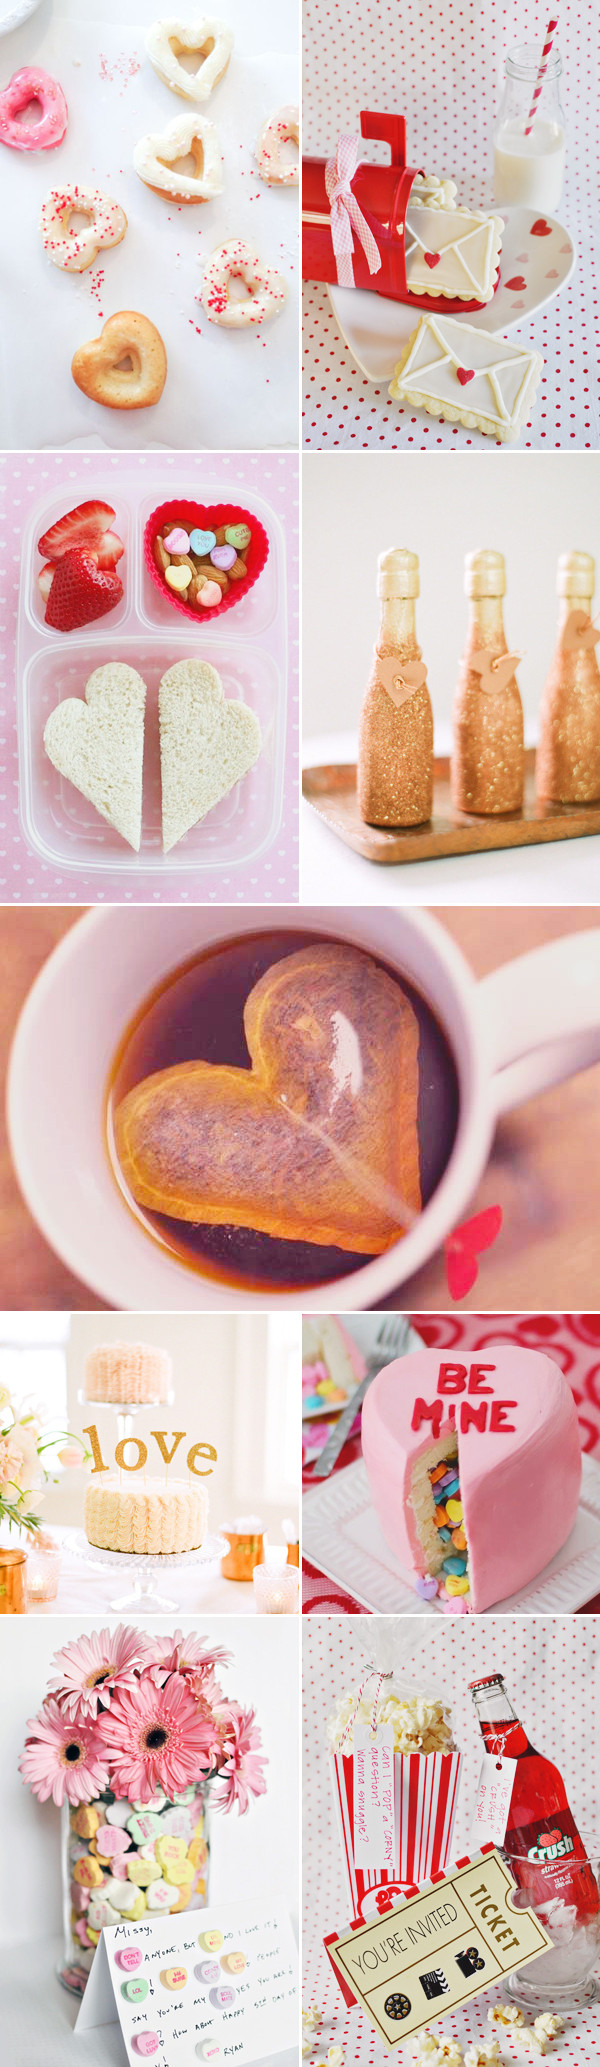 DIY Gifts That Say I Love You
 45 Fun Ways to Say “I Love You” Creative Valentine’s Day